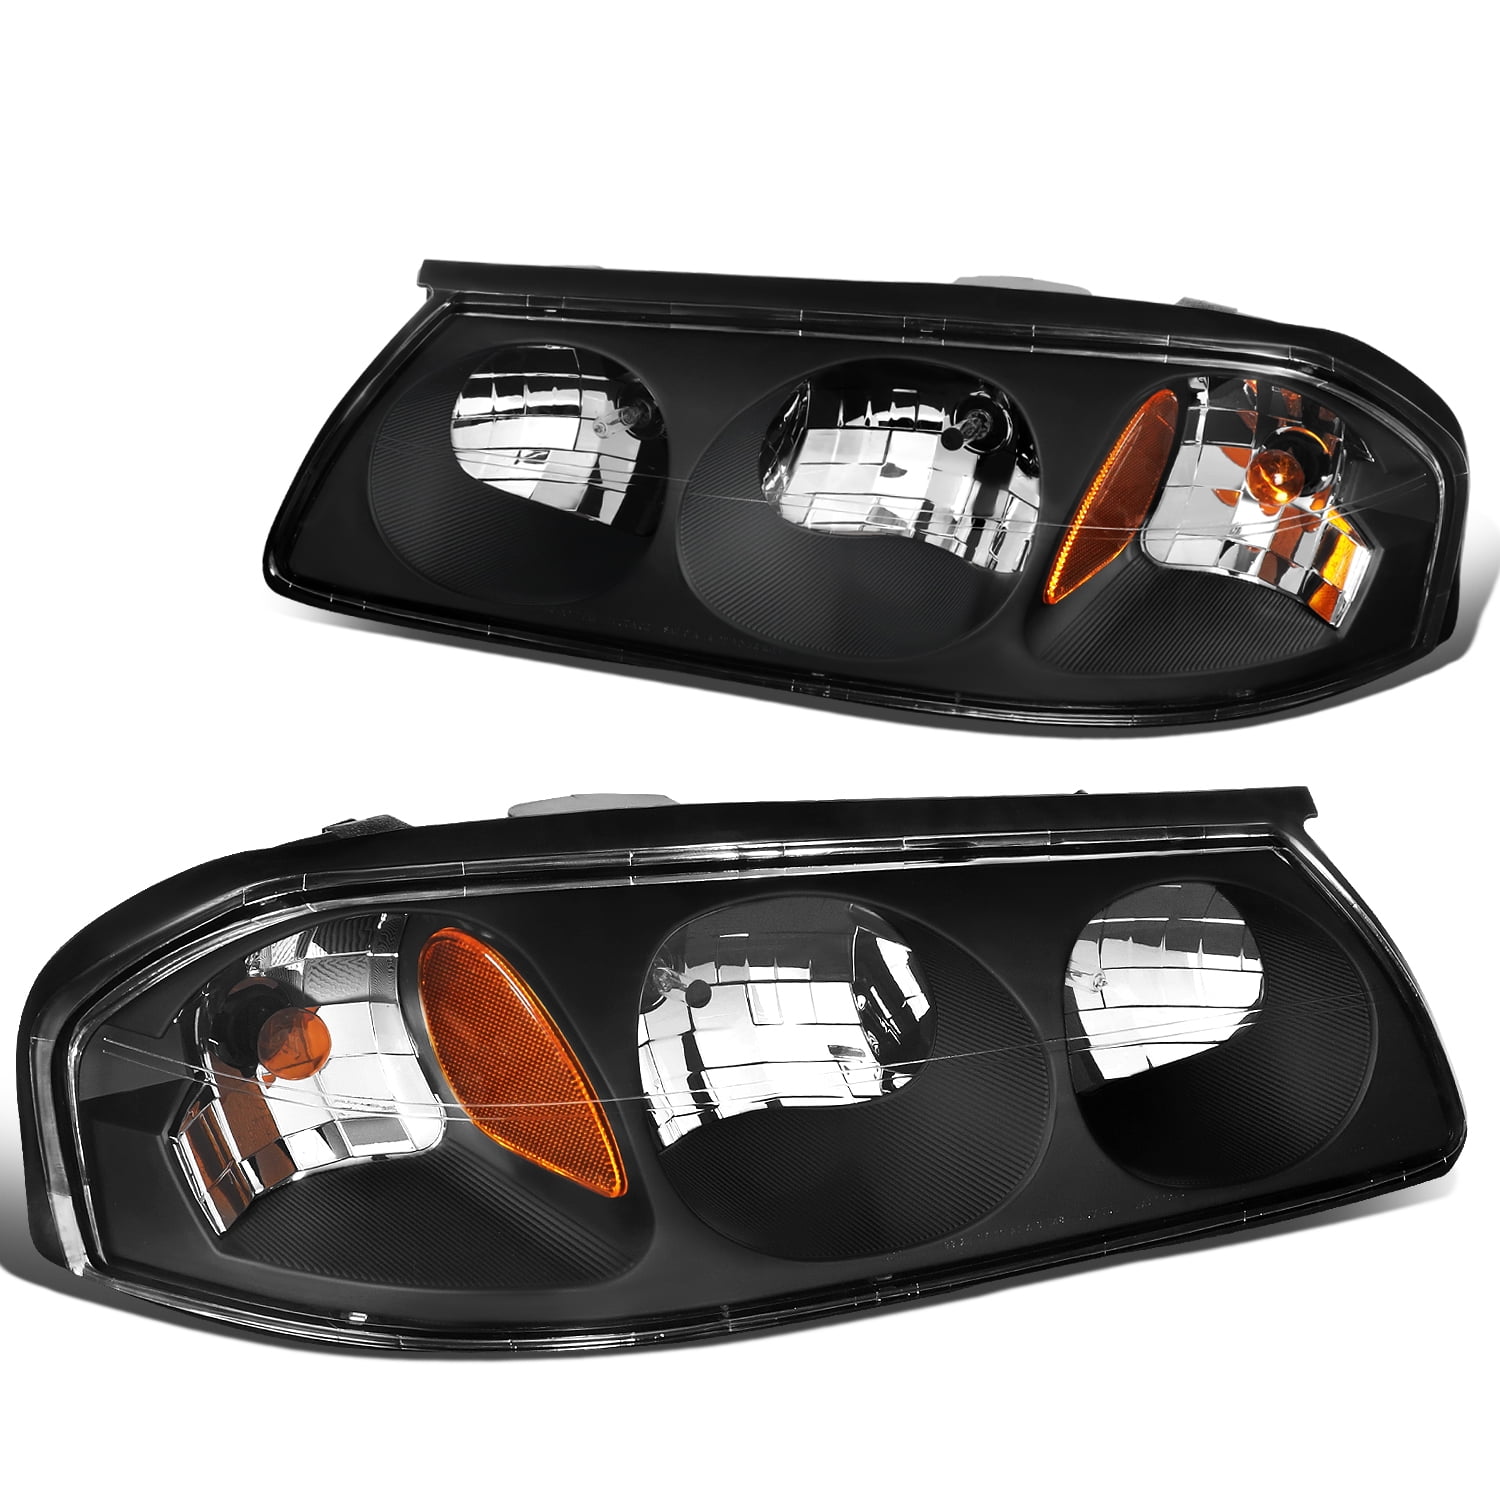 Pair of Black Housing Amber Corner Headlight Assembly Lamps Replacement for Chevy Impala 8th Gen 00-05 